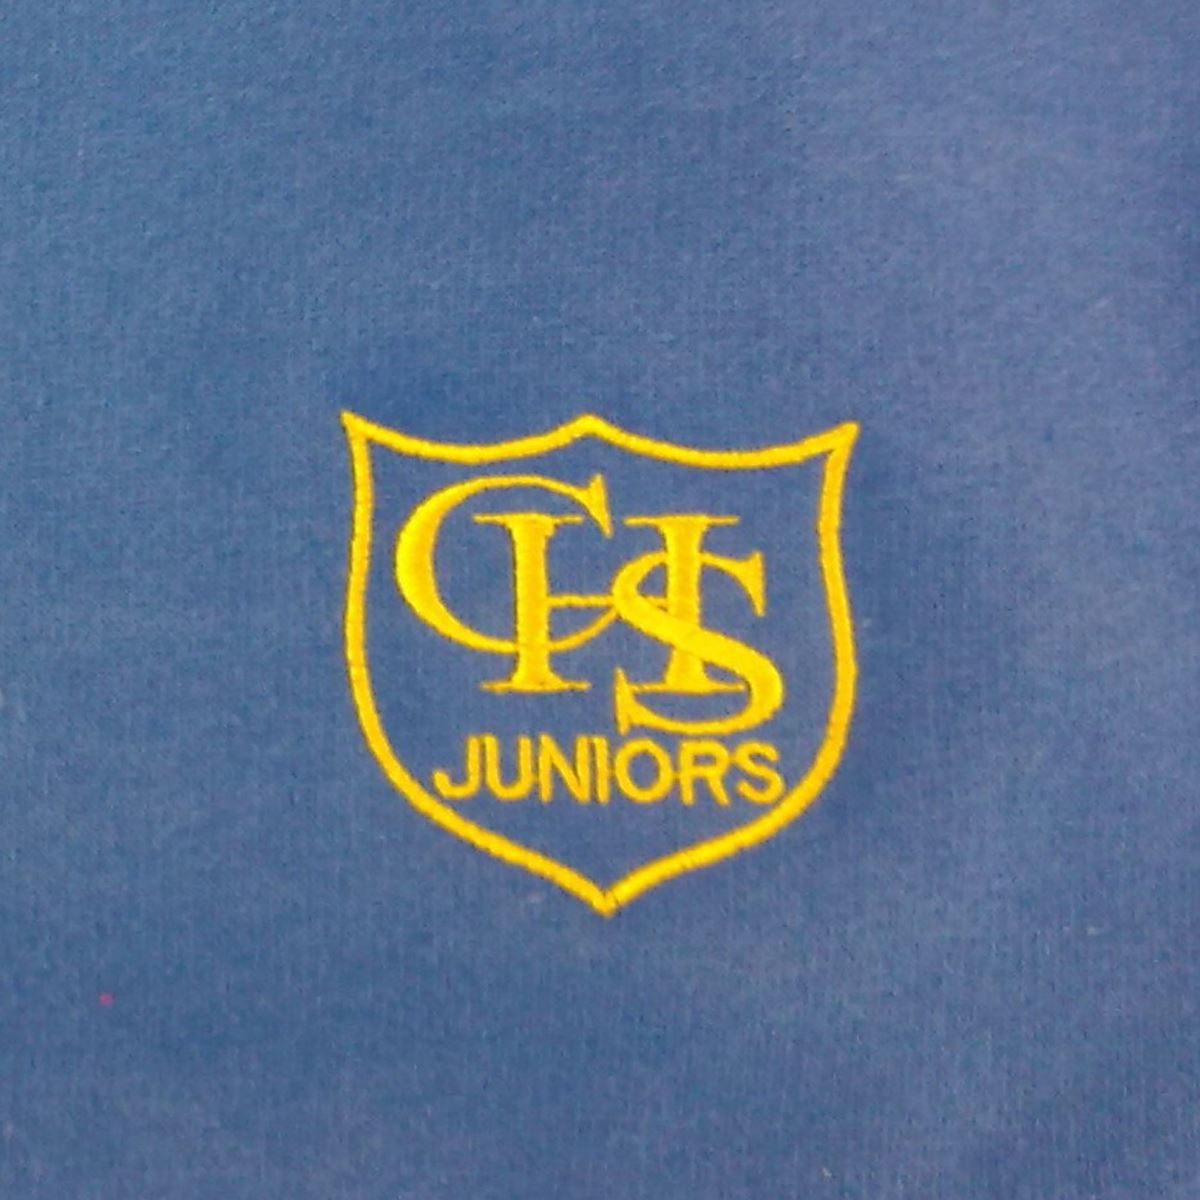 School logo embroidered onto uniform by KC Workwear of Southport, Merseyside.